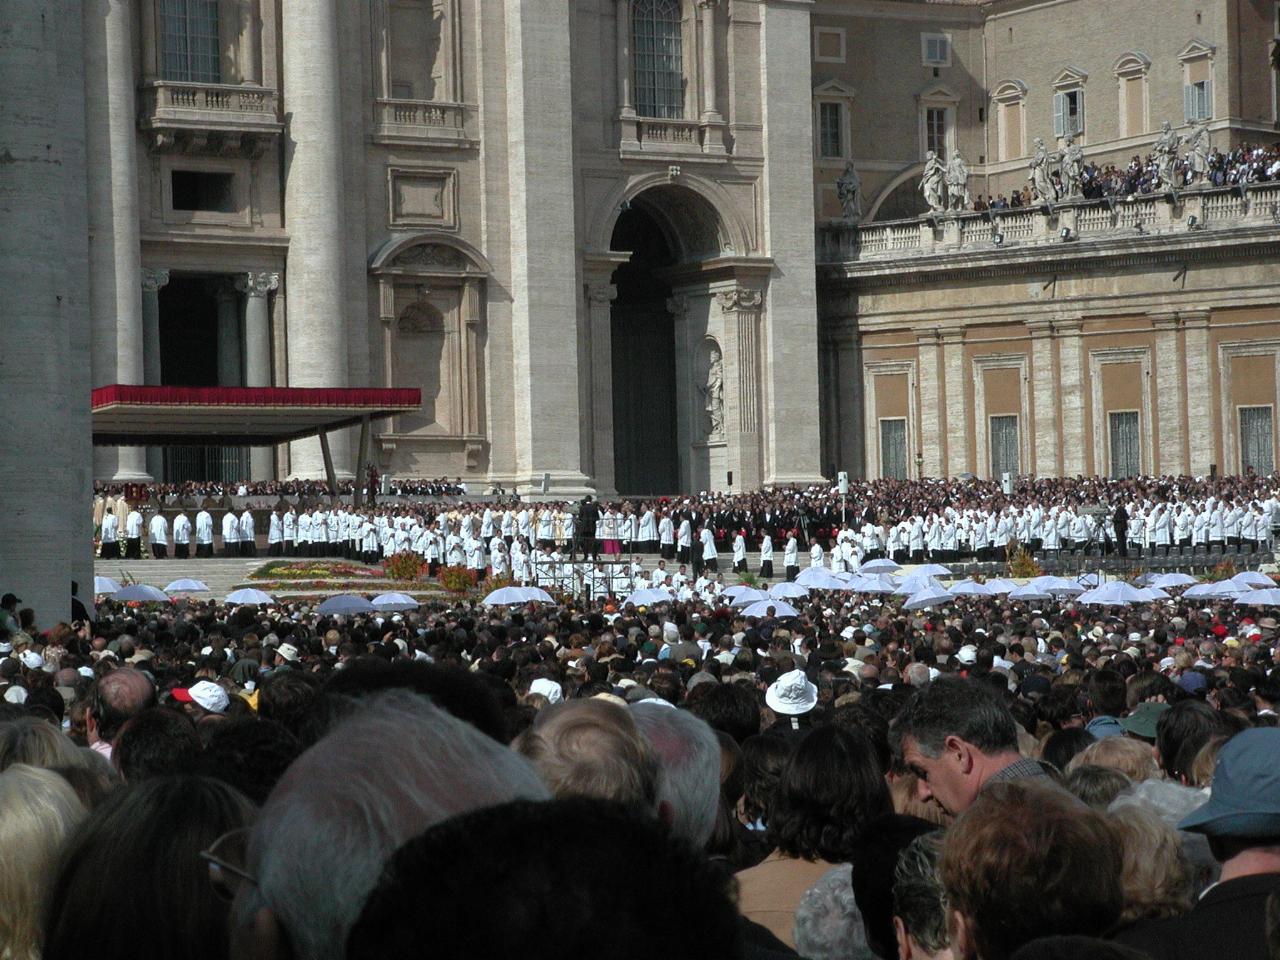 Phalanx of priests walking out to distribute Communion